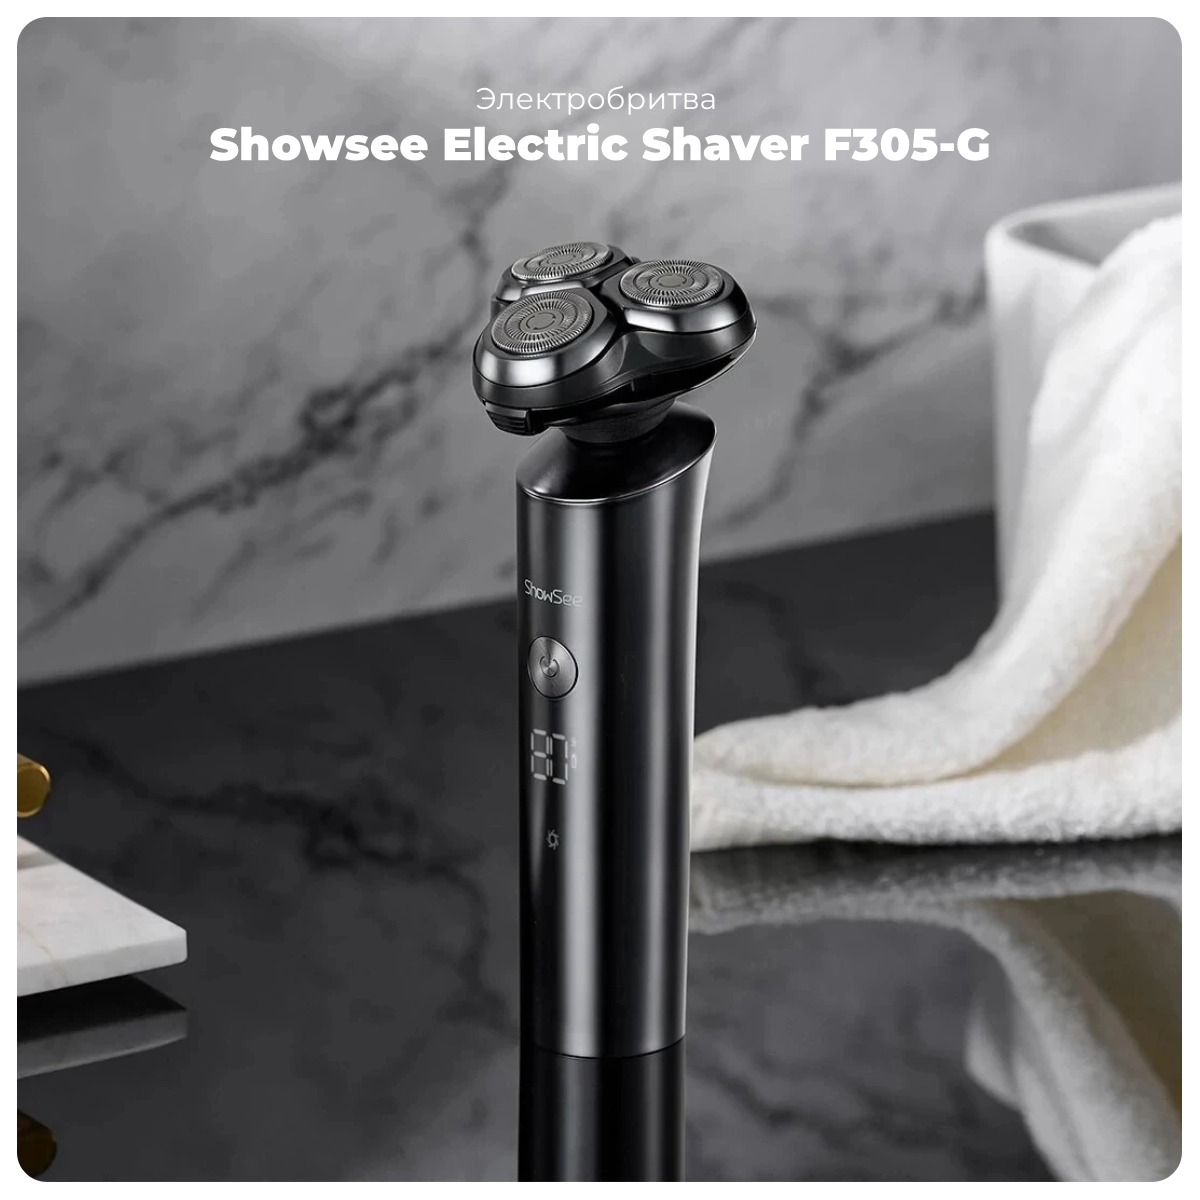 Showsee-Electric-Shaver-F305-G-01